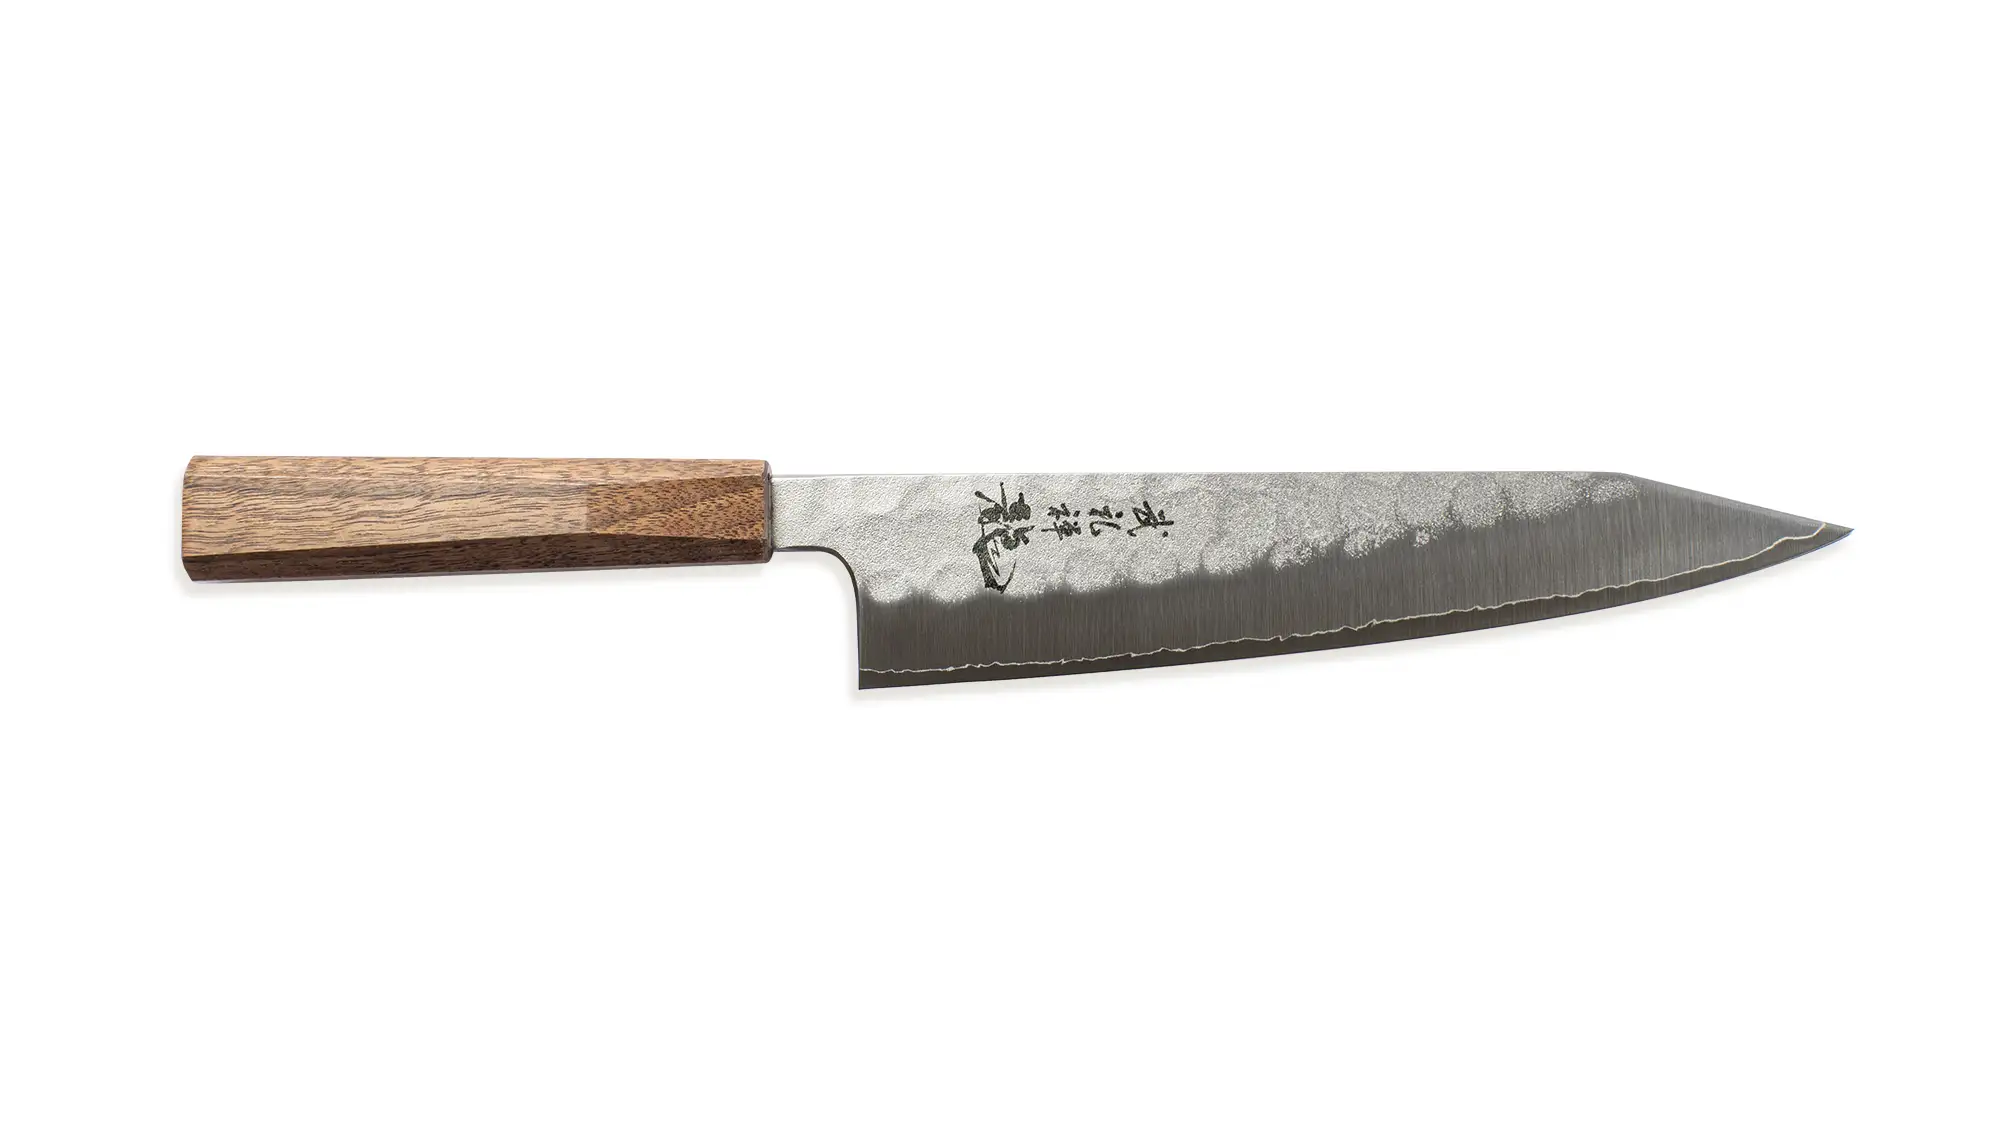 Removing Fish Scales The Japanese Way - Sharpest Knife in the